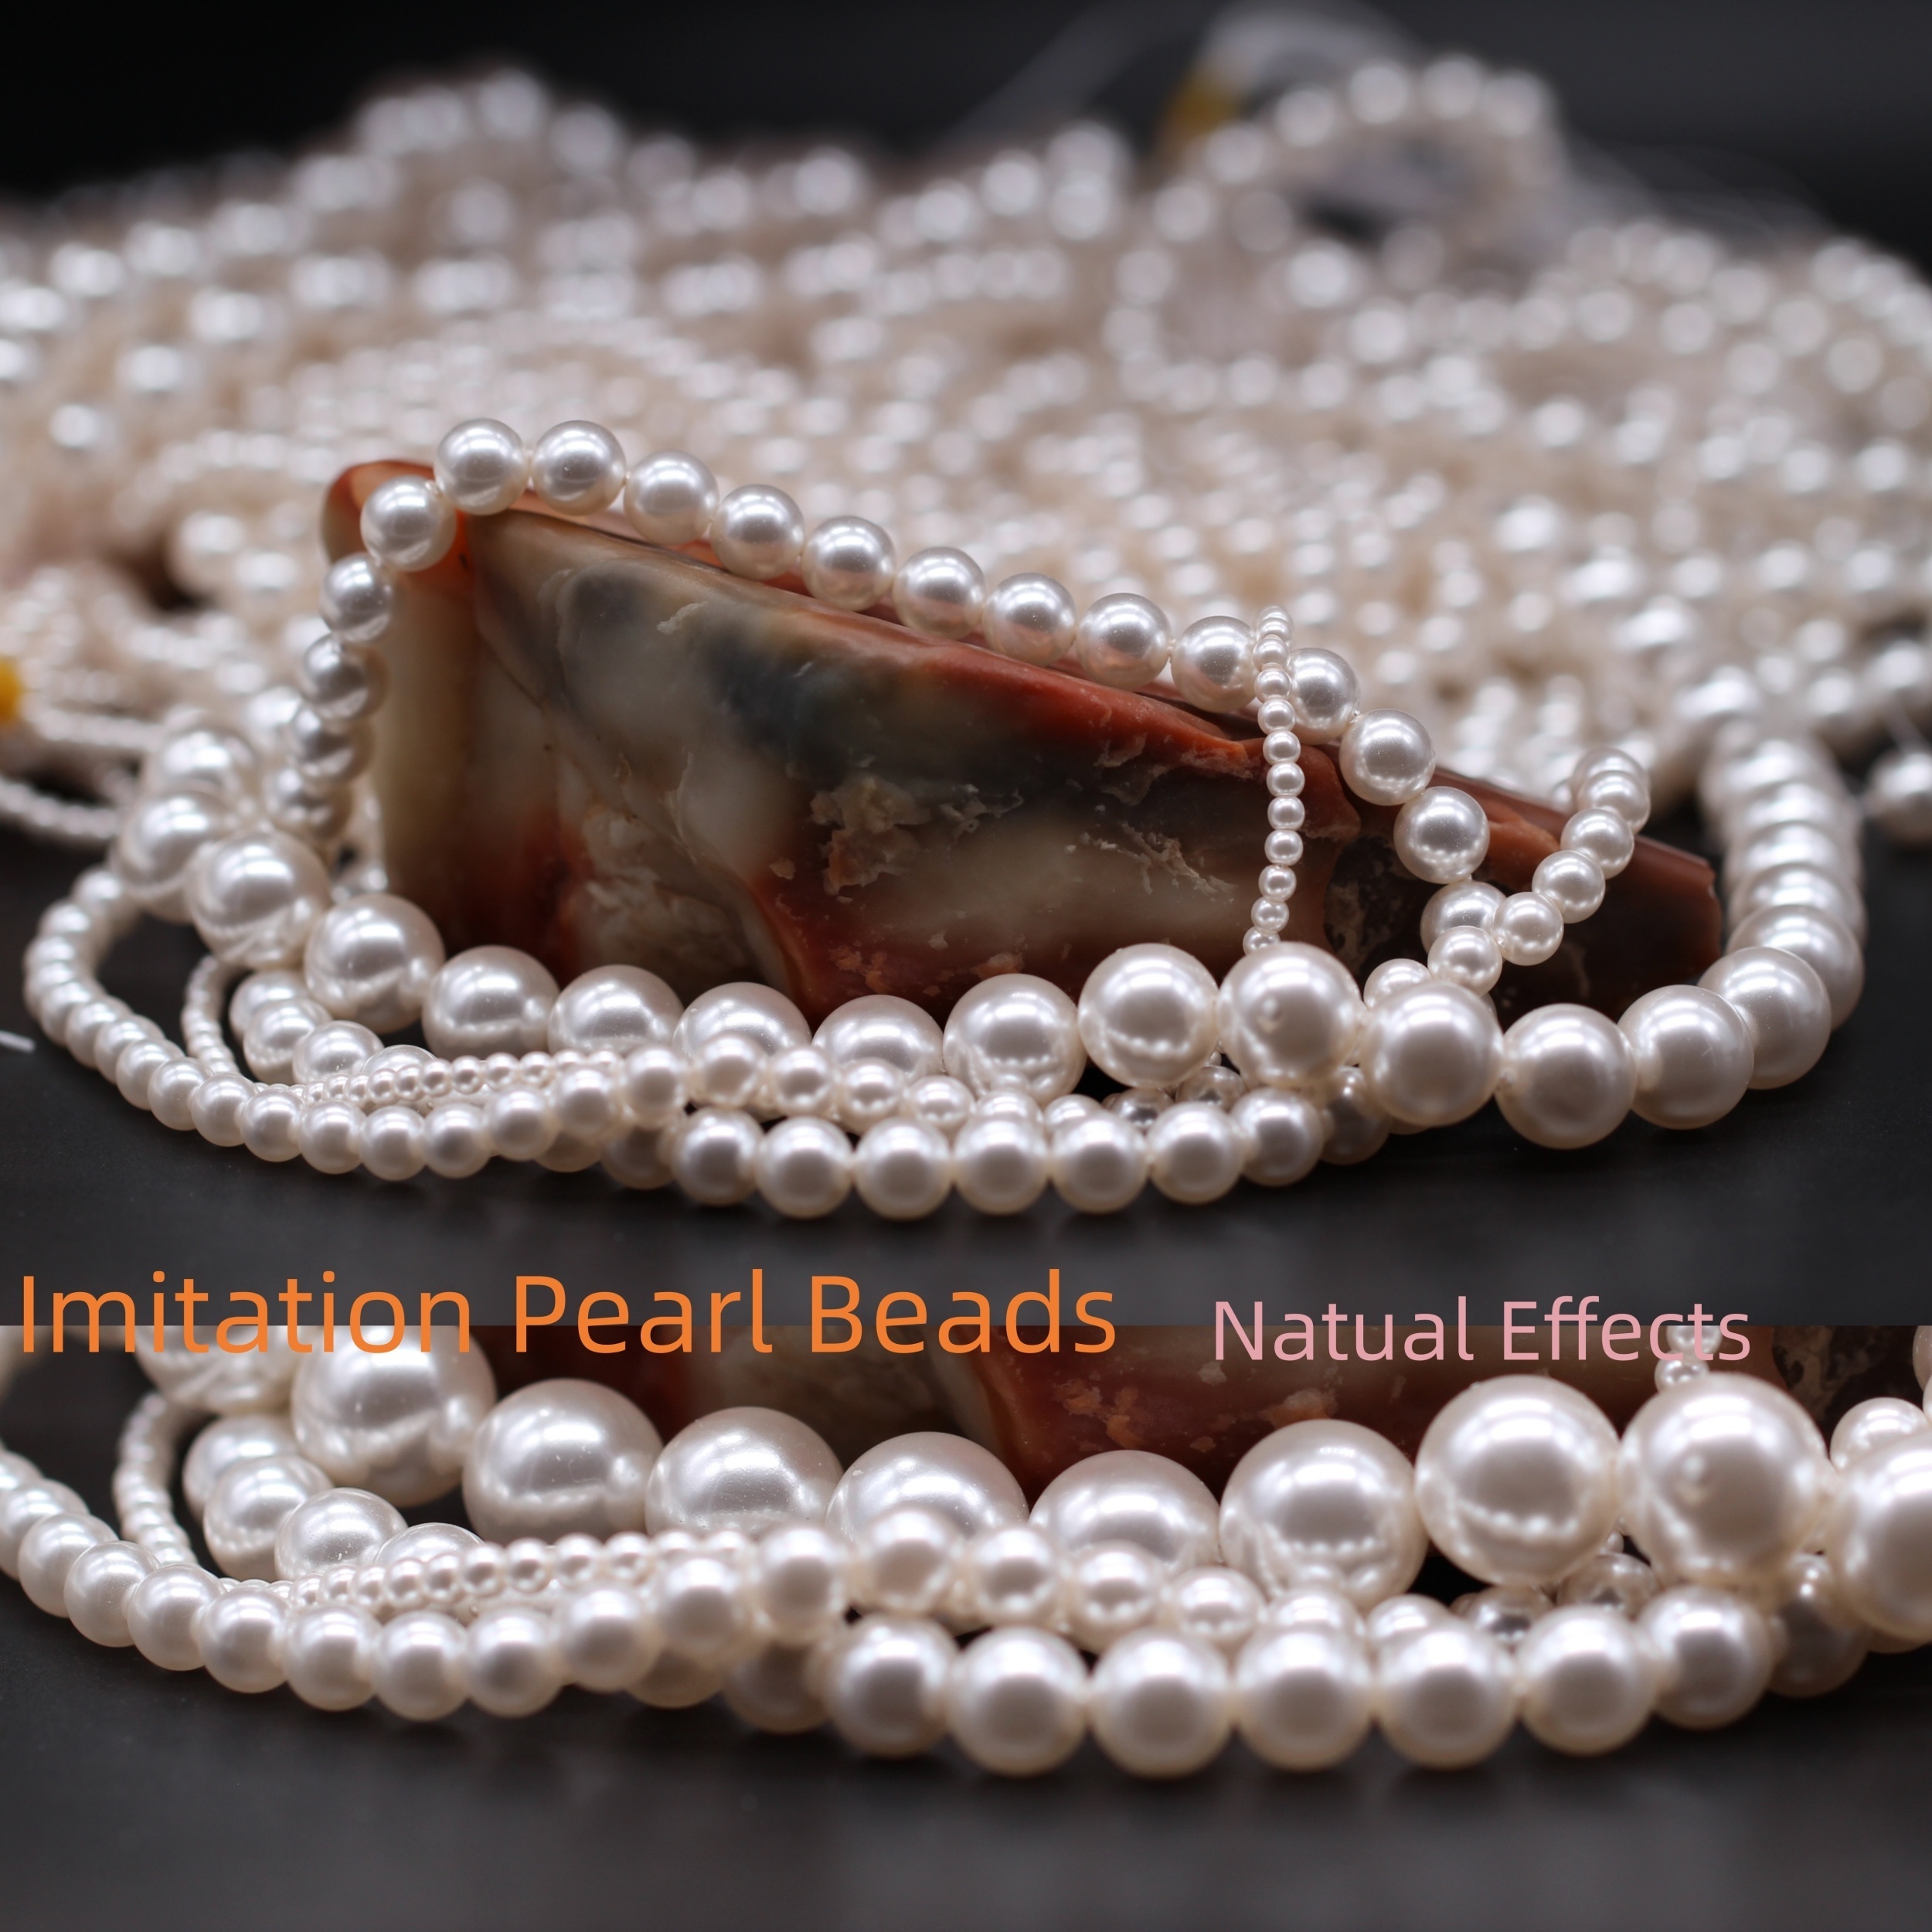 1960PCS Pearl Beads, 6mm 28 Colors Multicolor Pearl Beads Loose Pearls For  Crafts With Holes For Jewelry Making, Small Pearl Filler Beads For Crafting  Bracelet Necklace Earrings